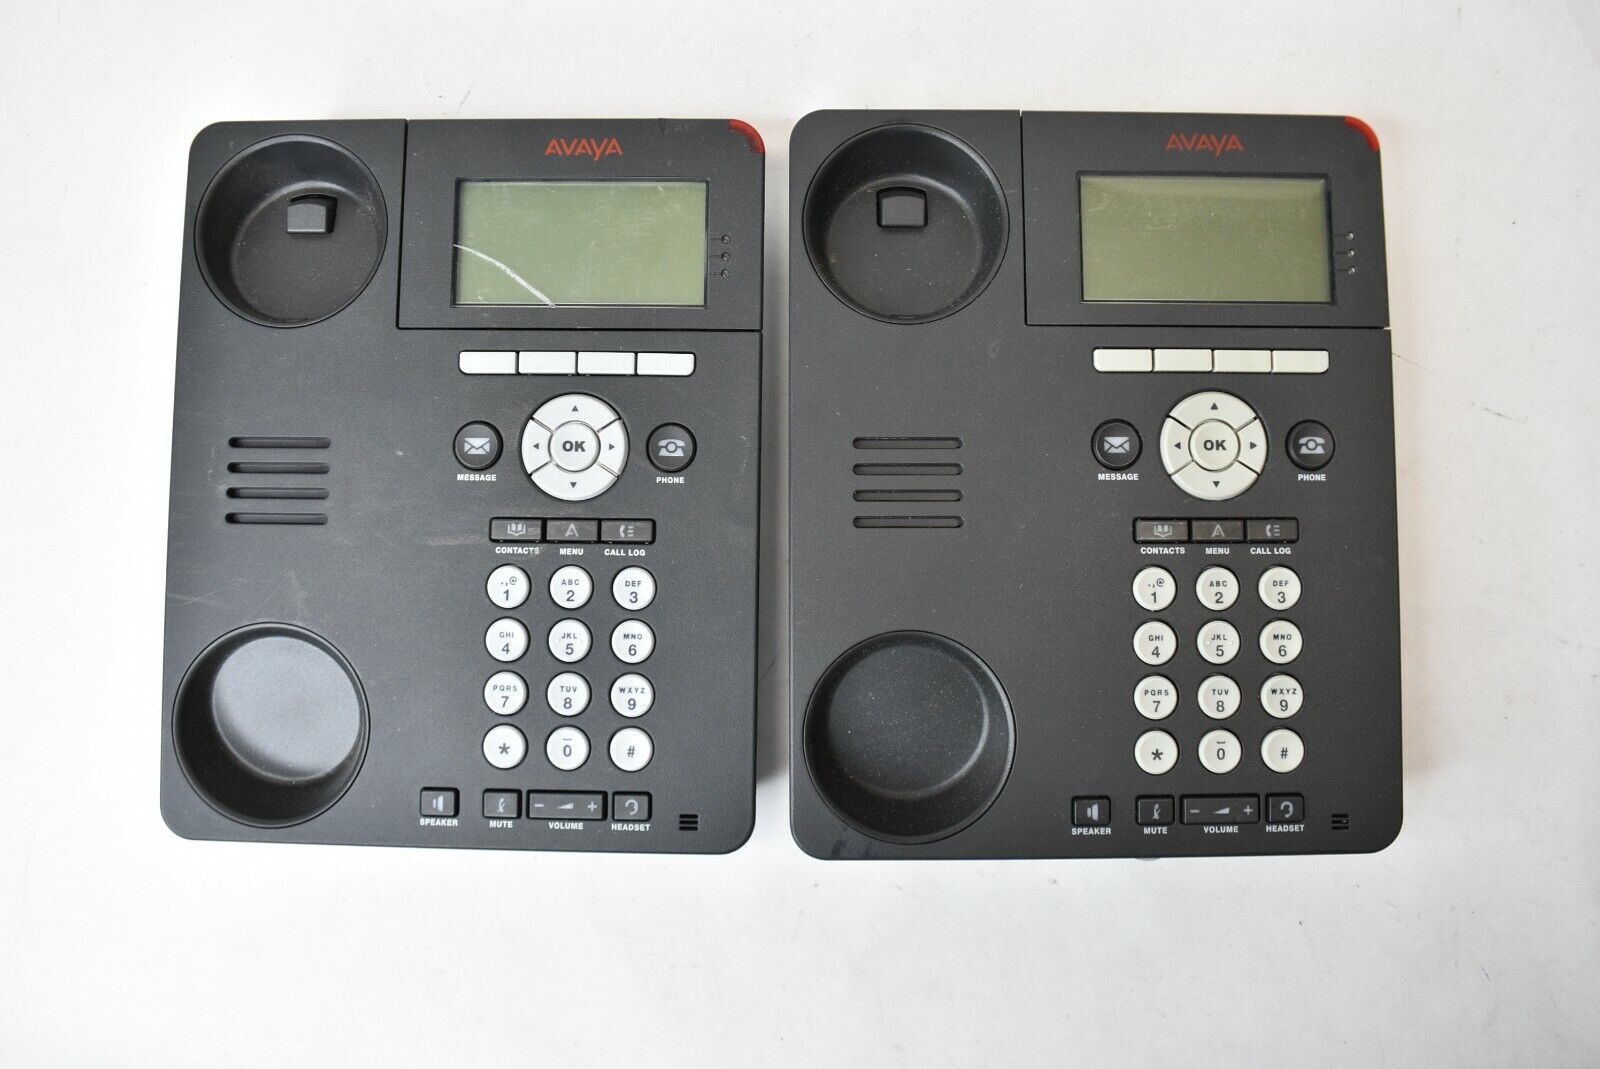 Lot of 2 Avaya Home Office Business VoIP Phone Bases 9620L 9620D02L-1009